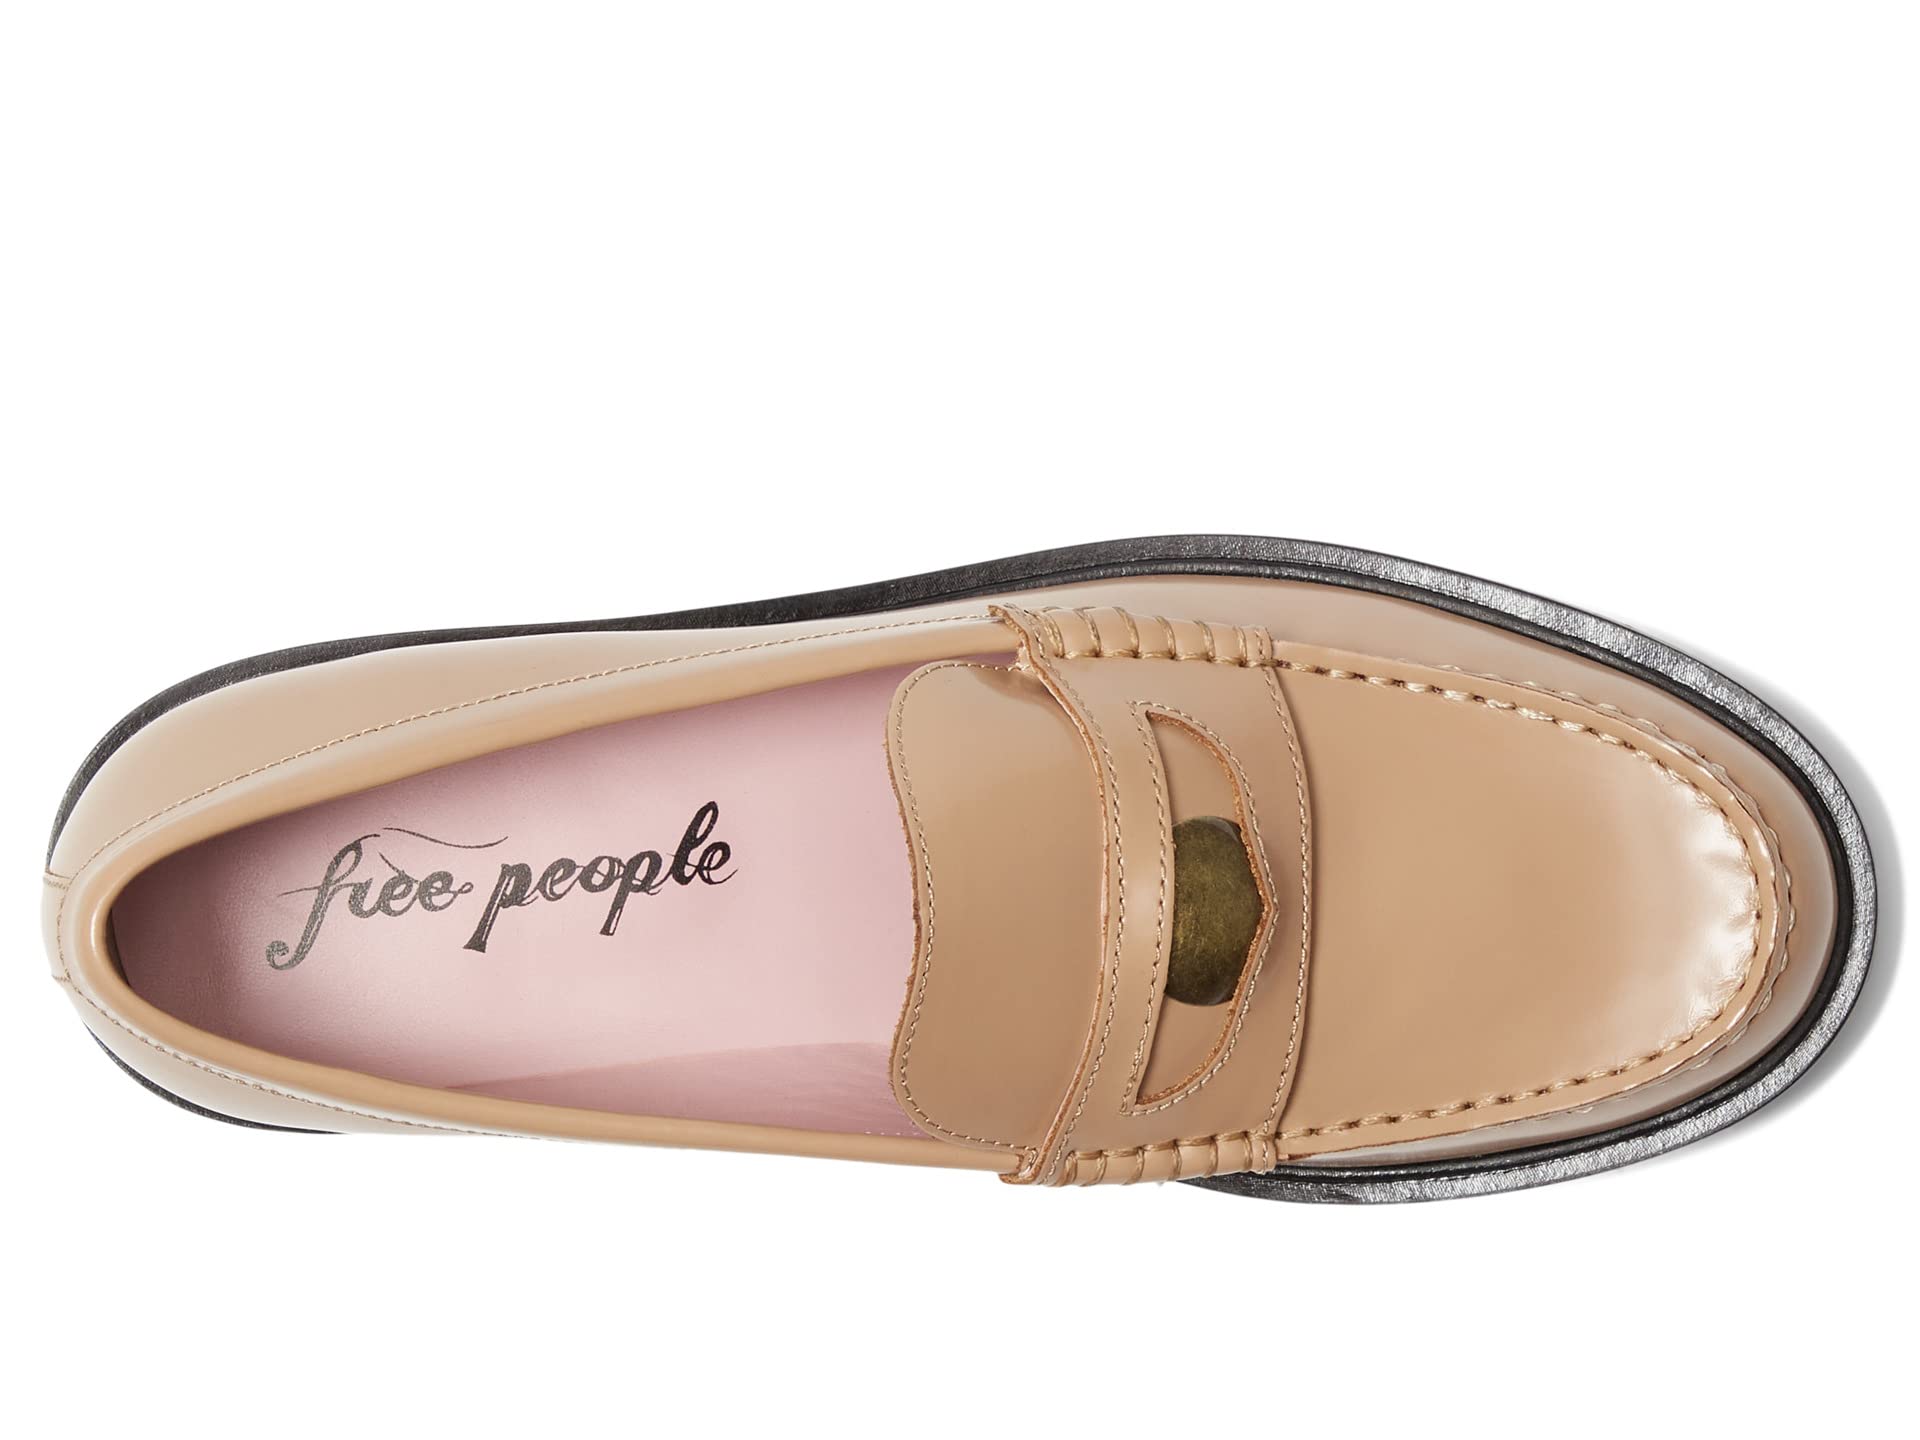 Лоферы Free People Liv Loafer лоферы free people teagan tassel loafer цвет wild mulberry